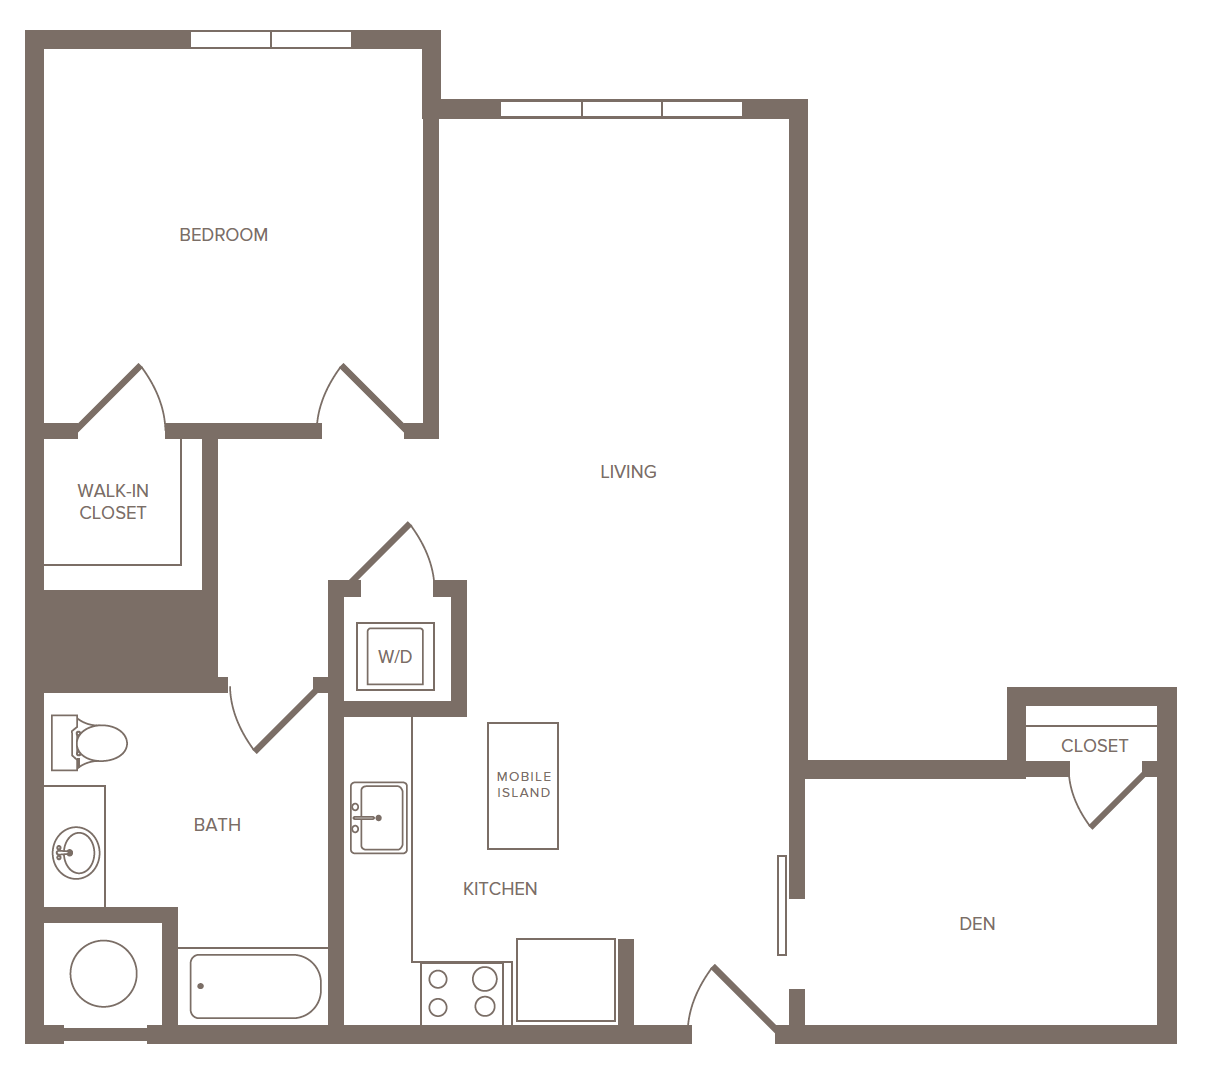 Floorplan for Apartment #2178, 1 bedroom unit at Halstead Parsippany